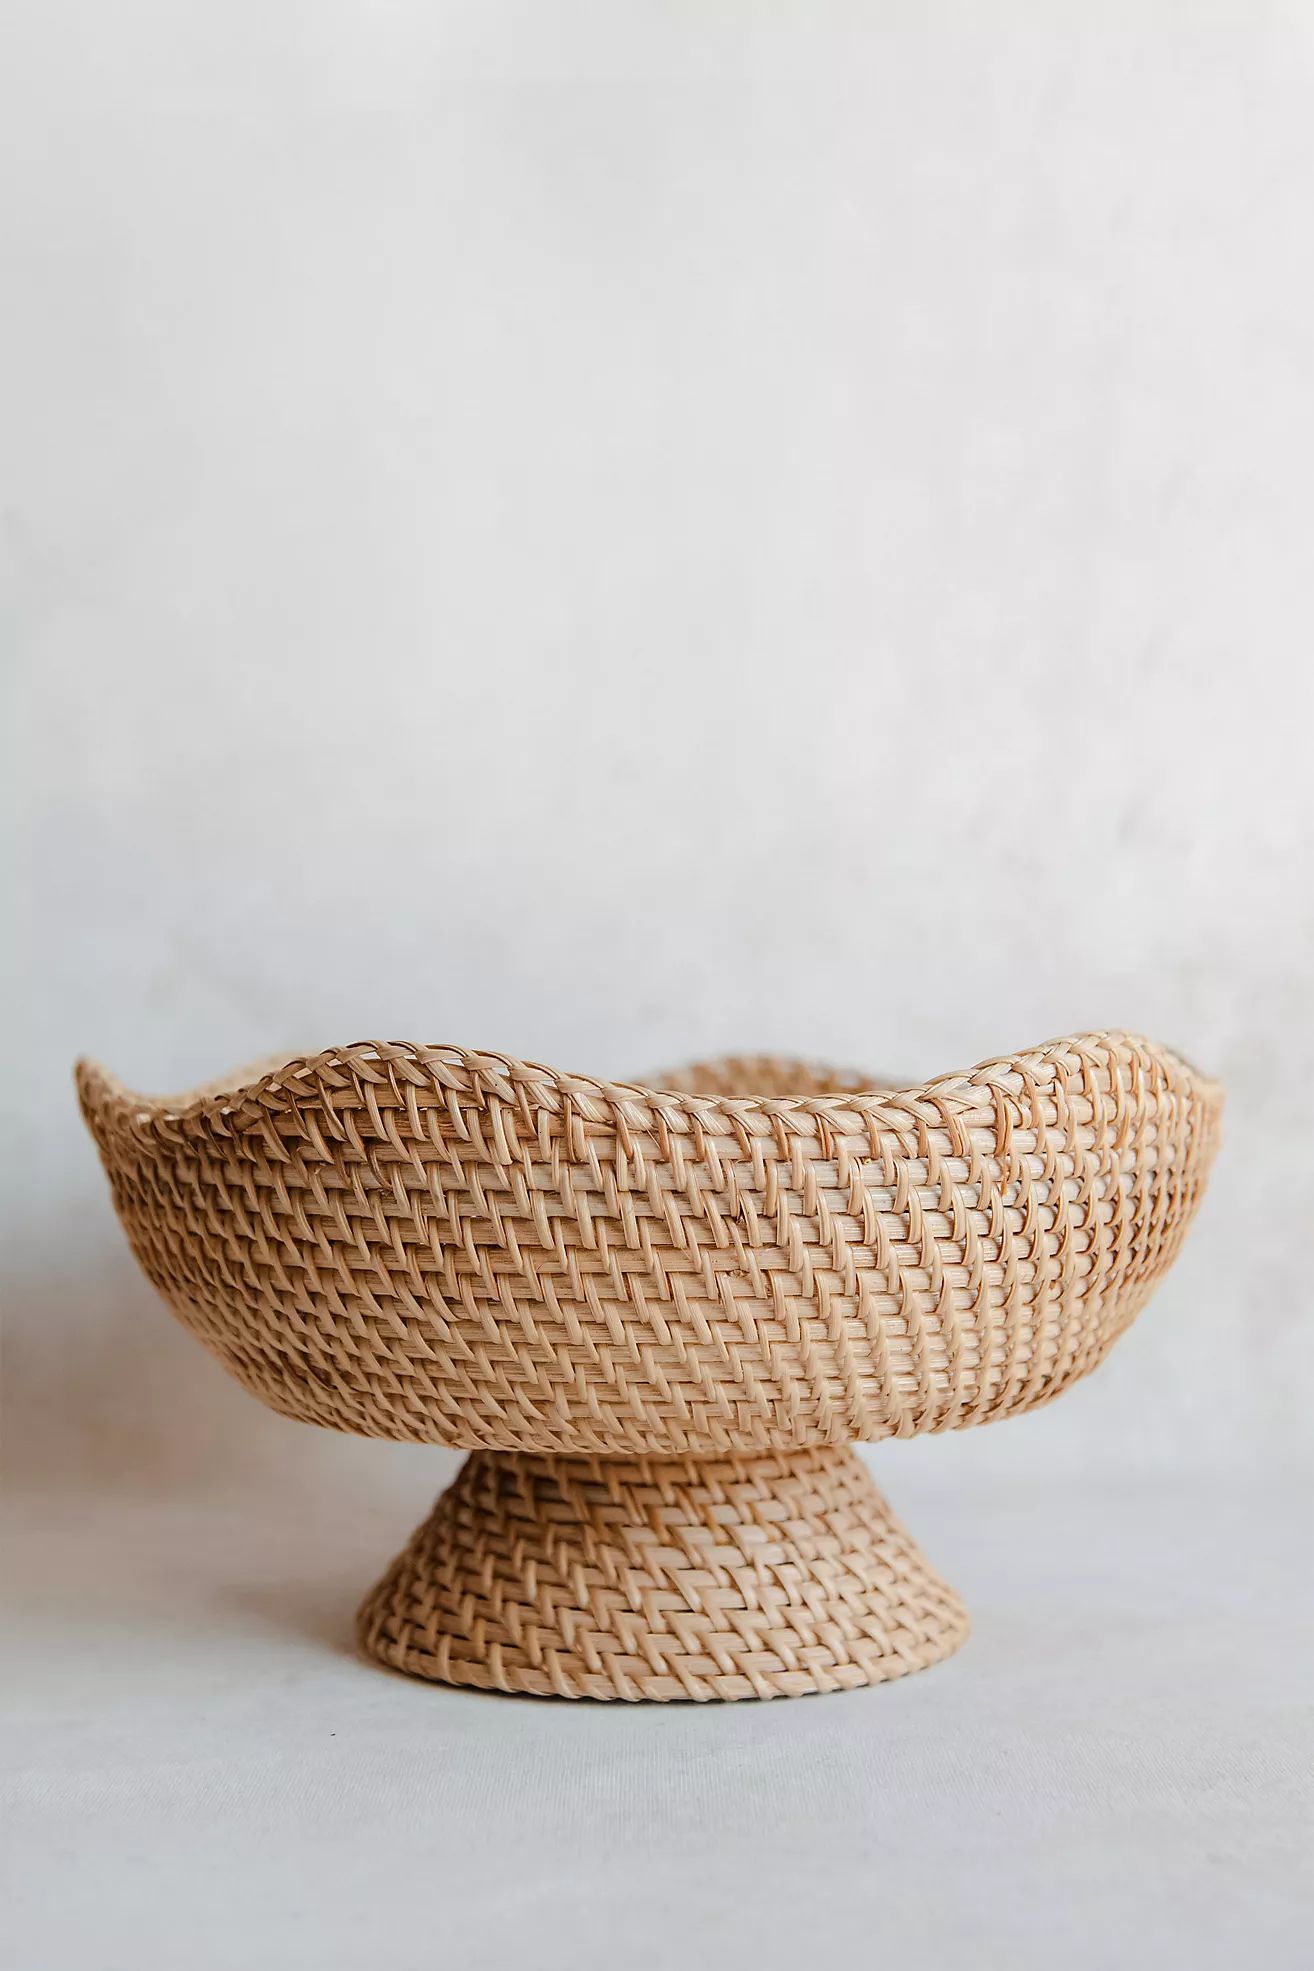 Connected Goods Rhode Rattan Scalloped Bowl | Anthropologie (US)